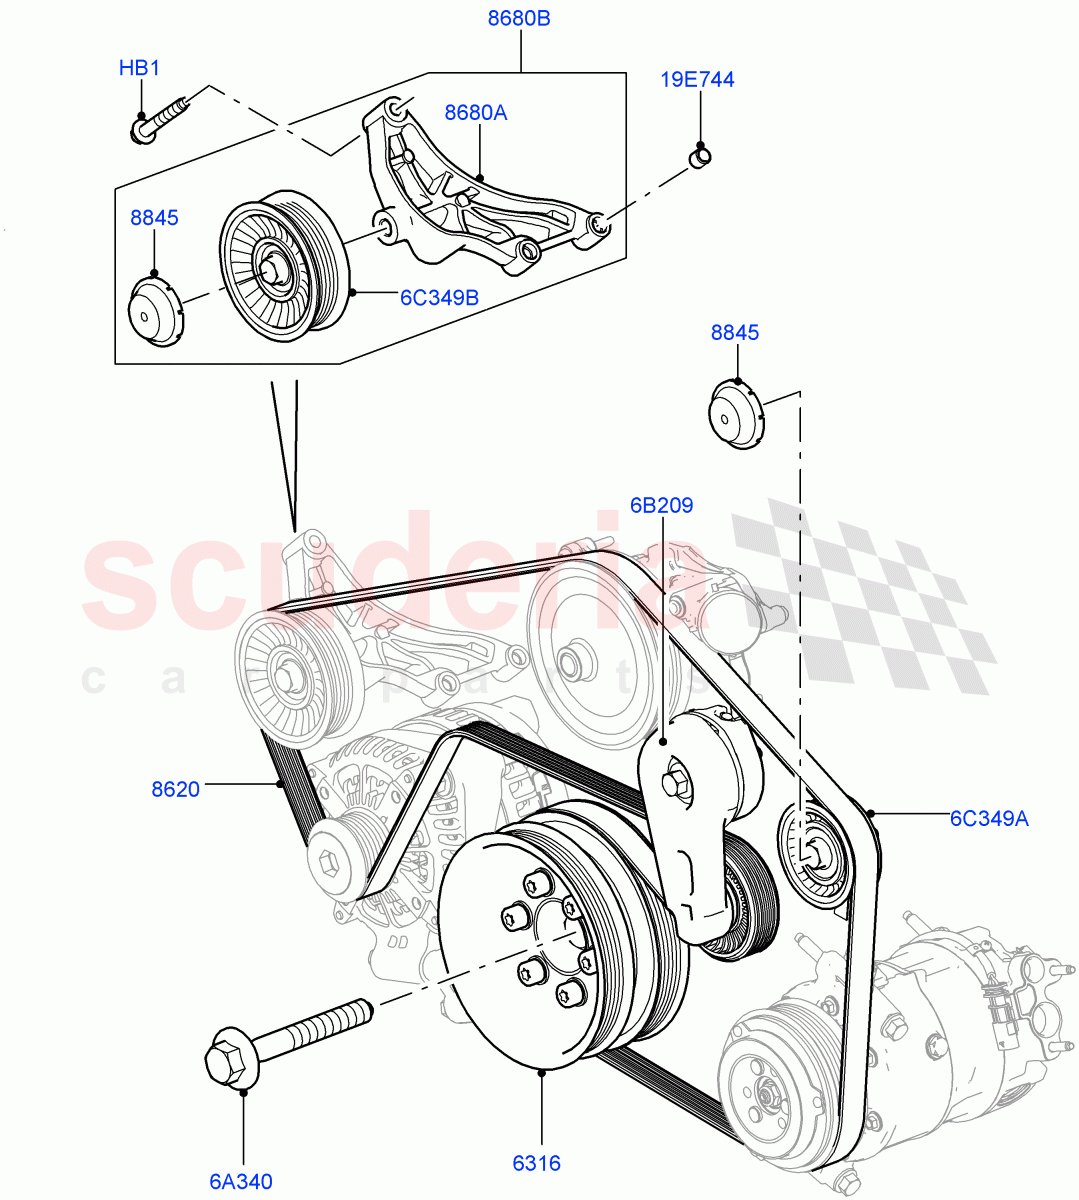 Pulleys And Drive Belts(Primary Drive)(5.0L OHC SGDI NA V8 Petrol - AJ133) of Land Rover Land Rover Range Rover (2012-2021) [5.0 OHC SGDI NA V8 Petrol]